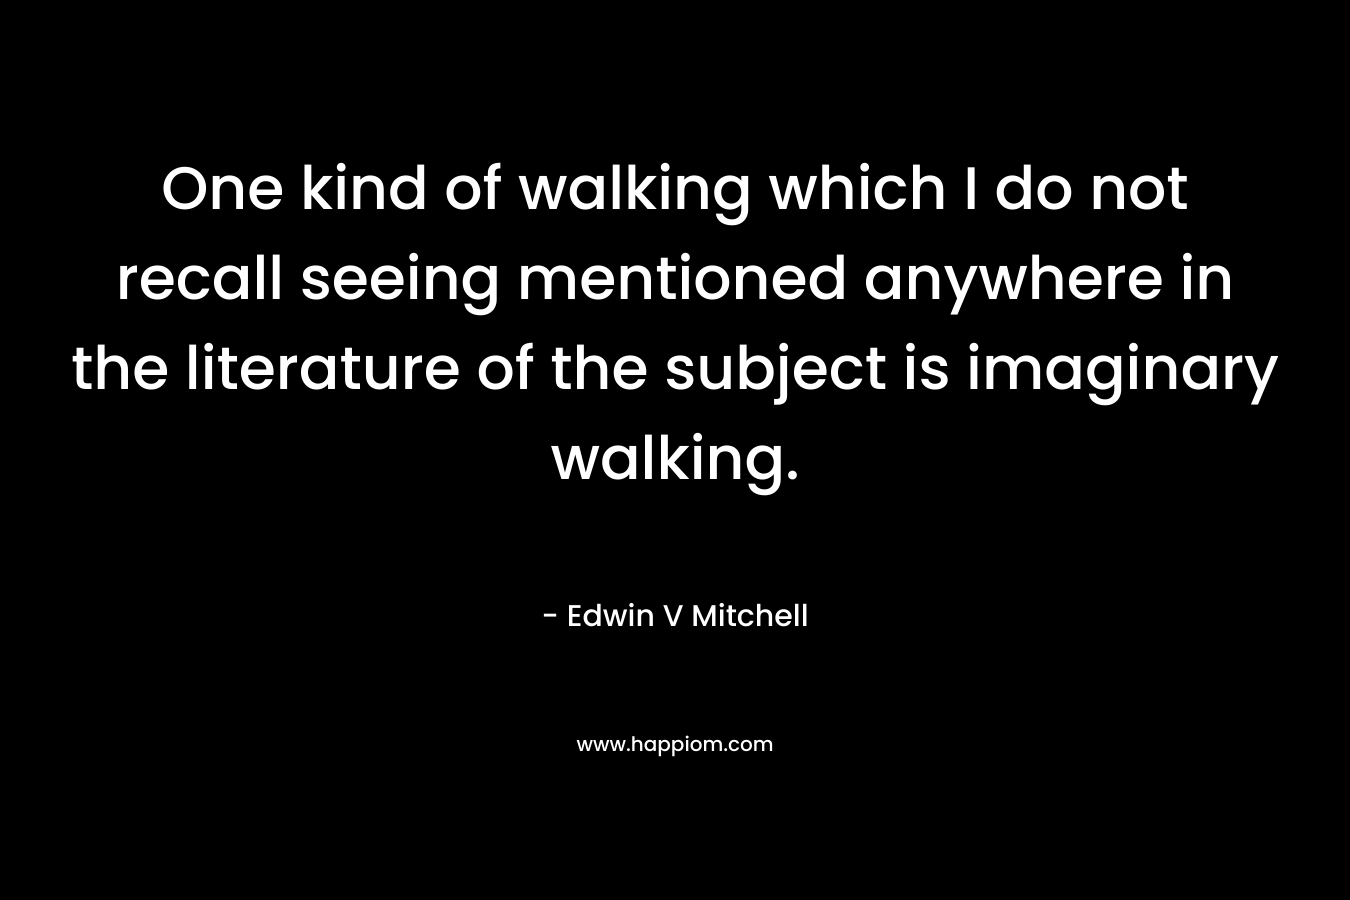 One kind of walking which I do not recall seeing mentioned anywhere in the literature of the subject is imaginary walking.